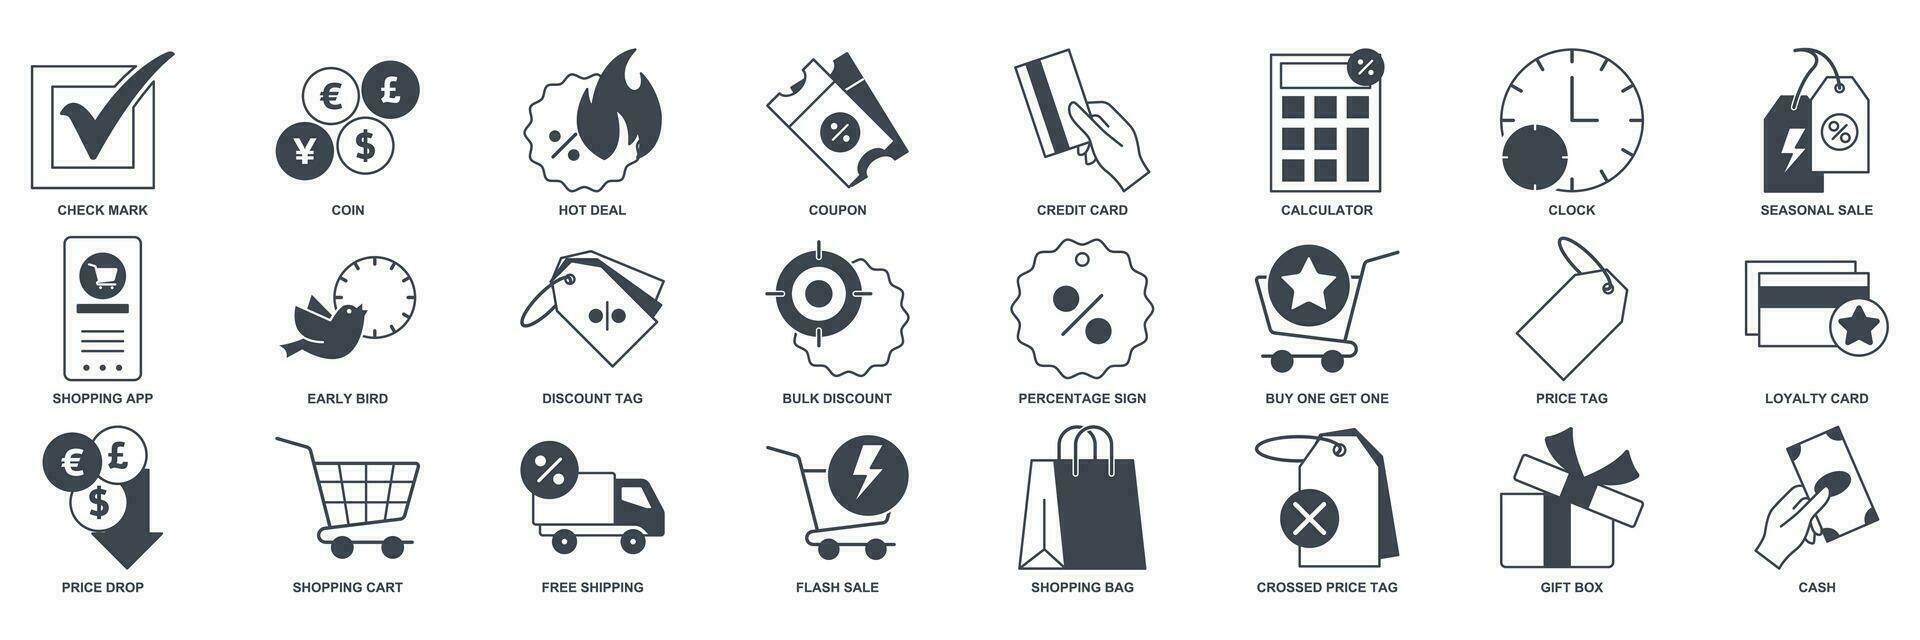 Discount icon set, Included icons as Price Tag, Early Bird, Shopping Bag, Credit Card and more symbols collection, logo isolated vector illustration